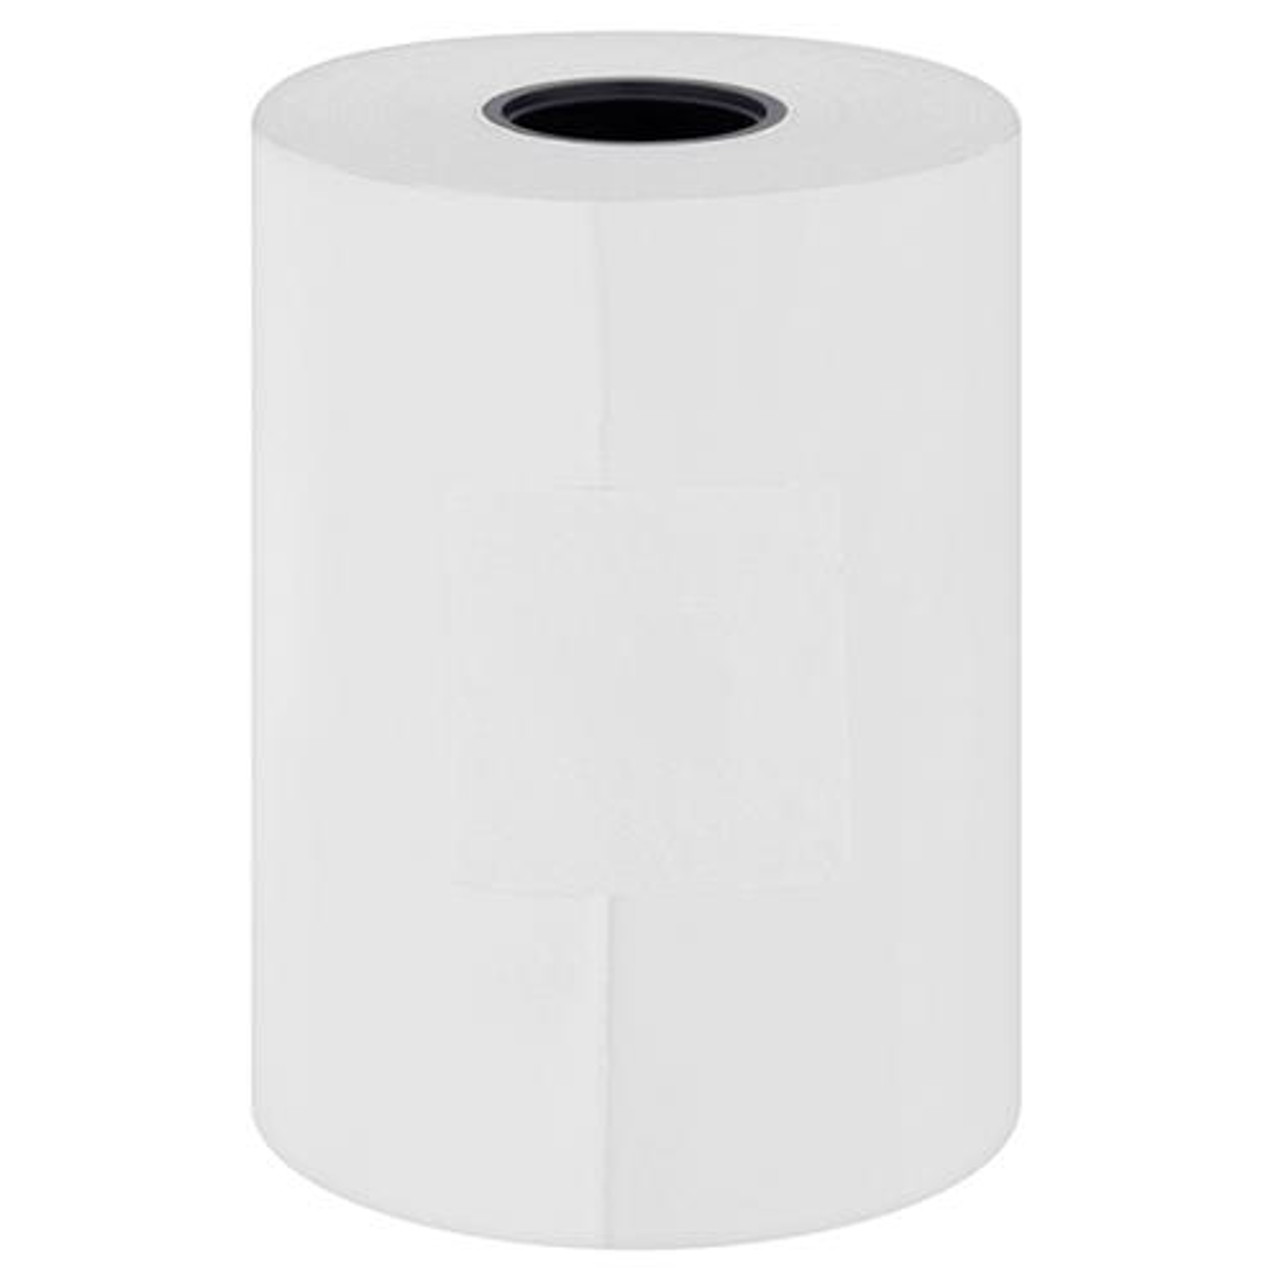 Thermal till roll 57 x 80mm 1Ply pack of 50